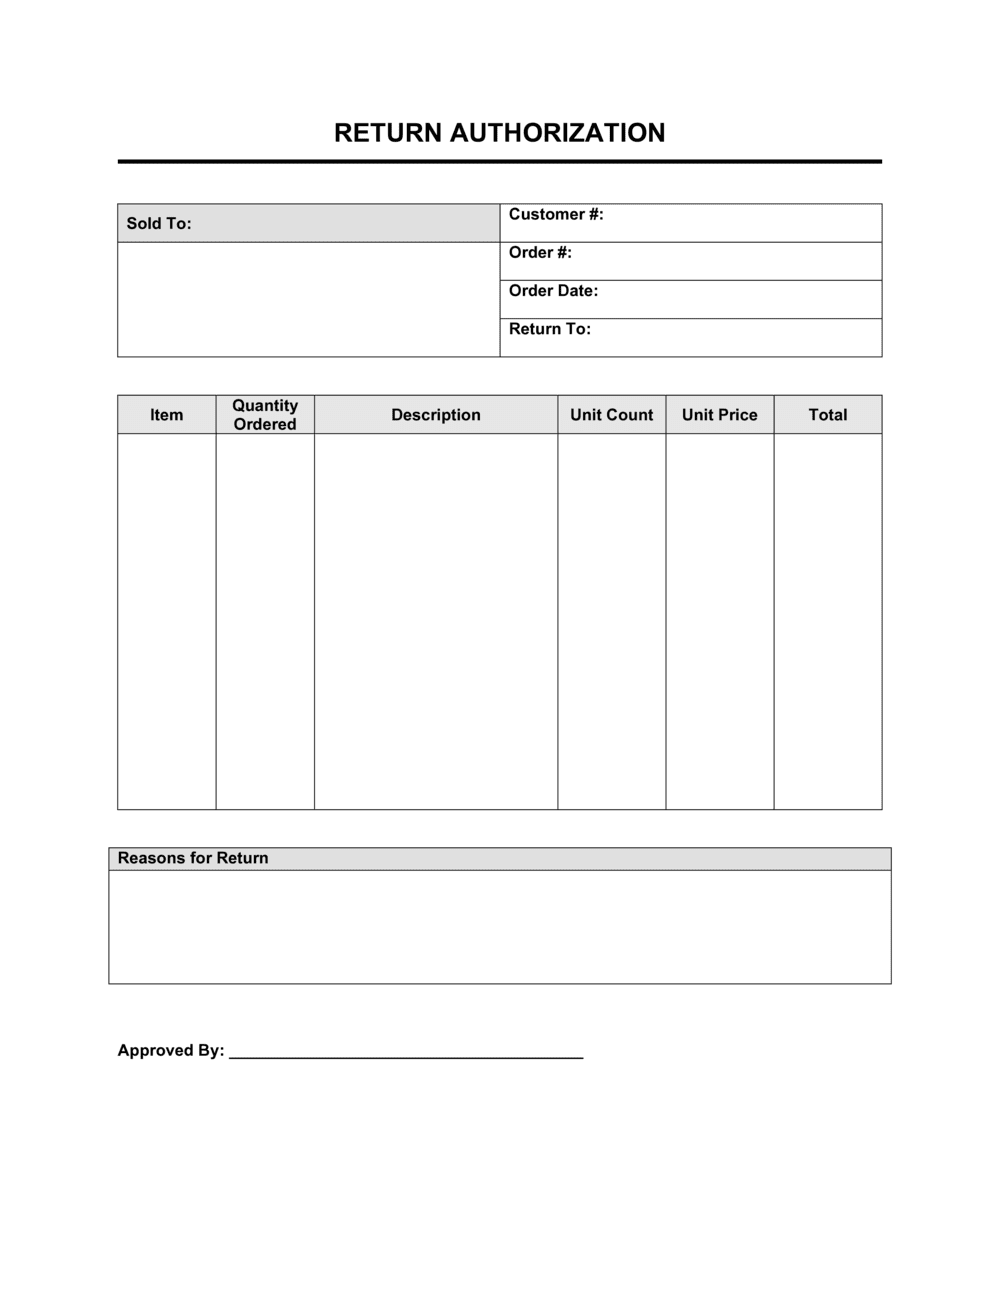 Return Authorization Form Template Excel